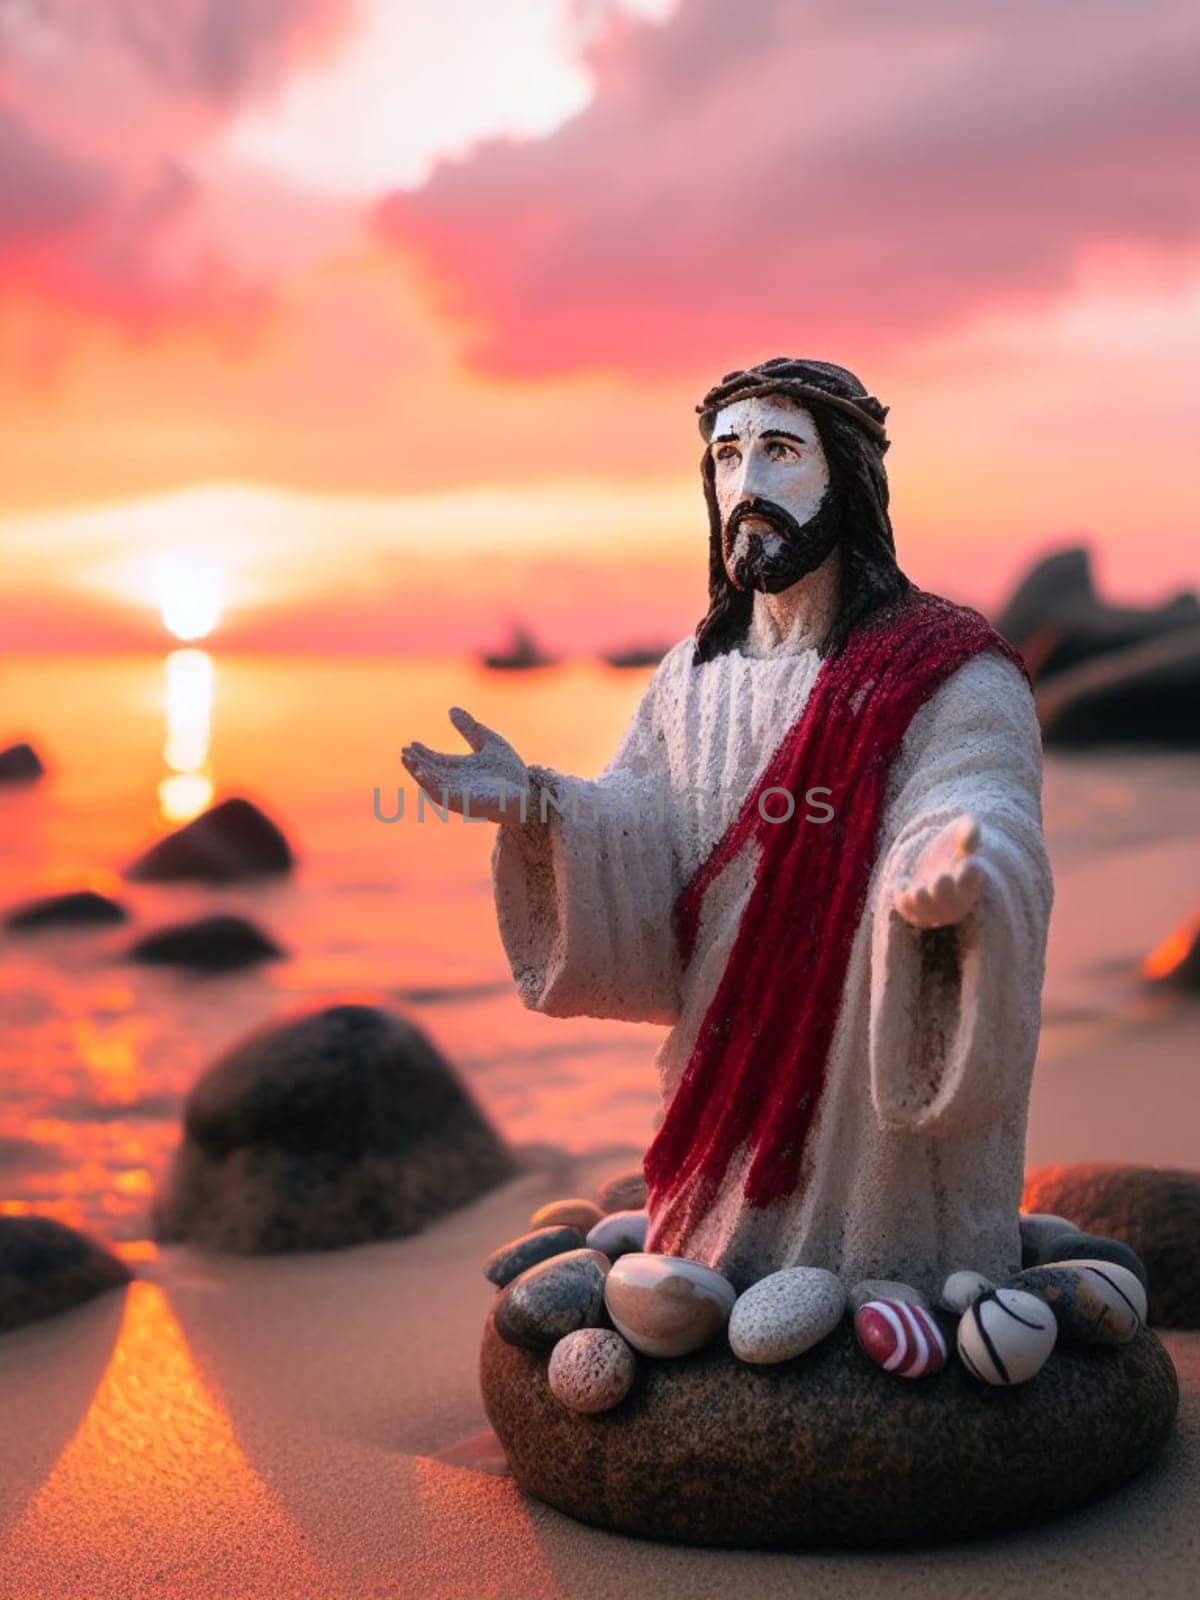 Sculpture of Jesus Christ made of pebbles at the beacj at sunset, asking for peace stop war concept by verbano